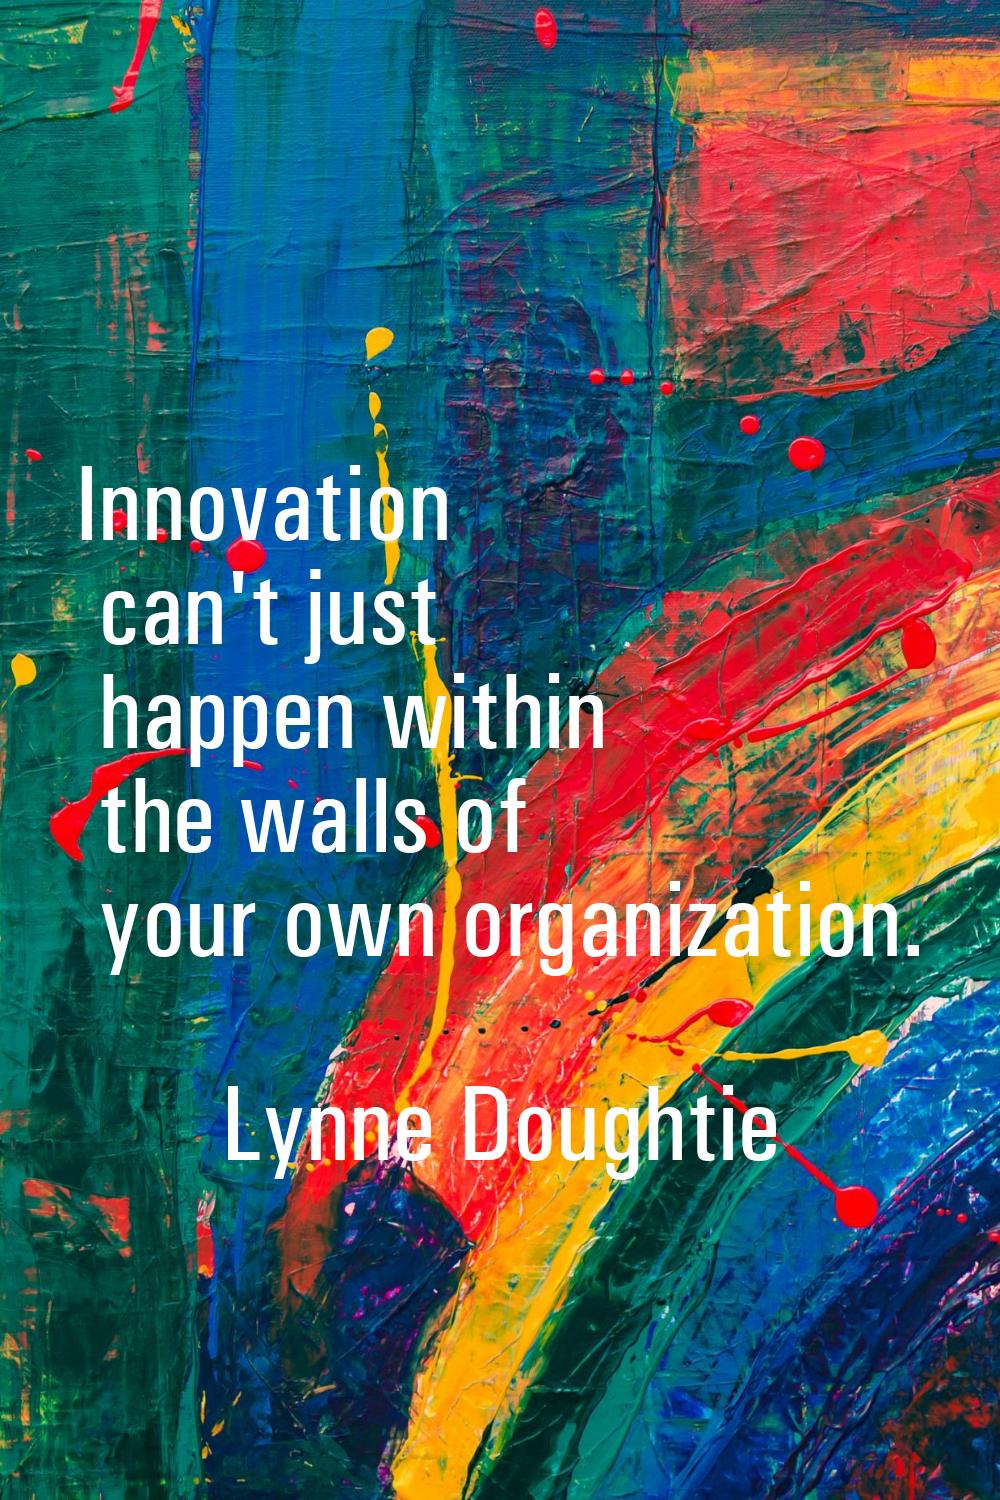 Innovation can't just happen within the walls of your own organization.